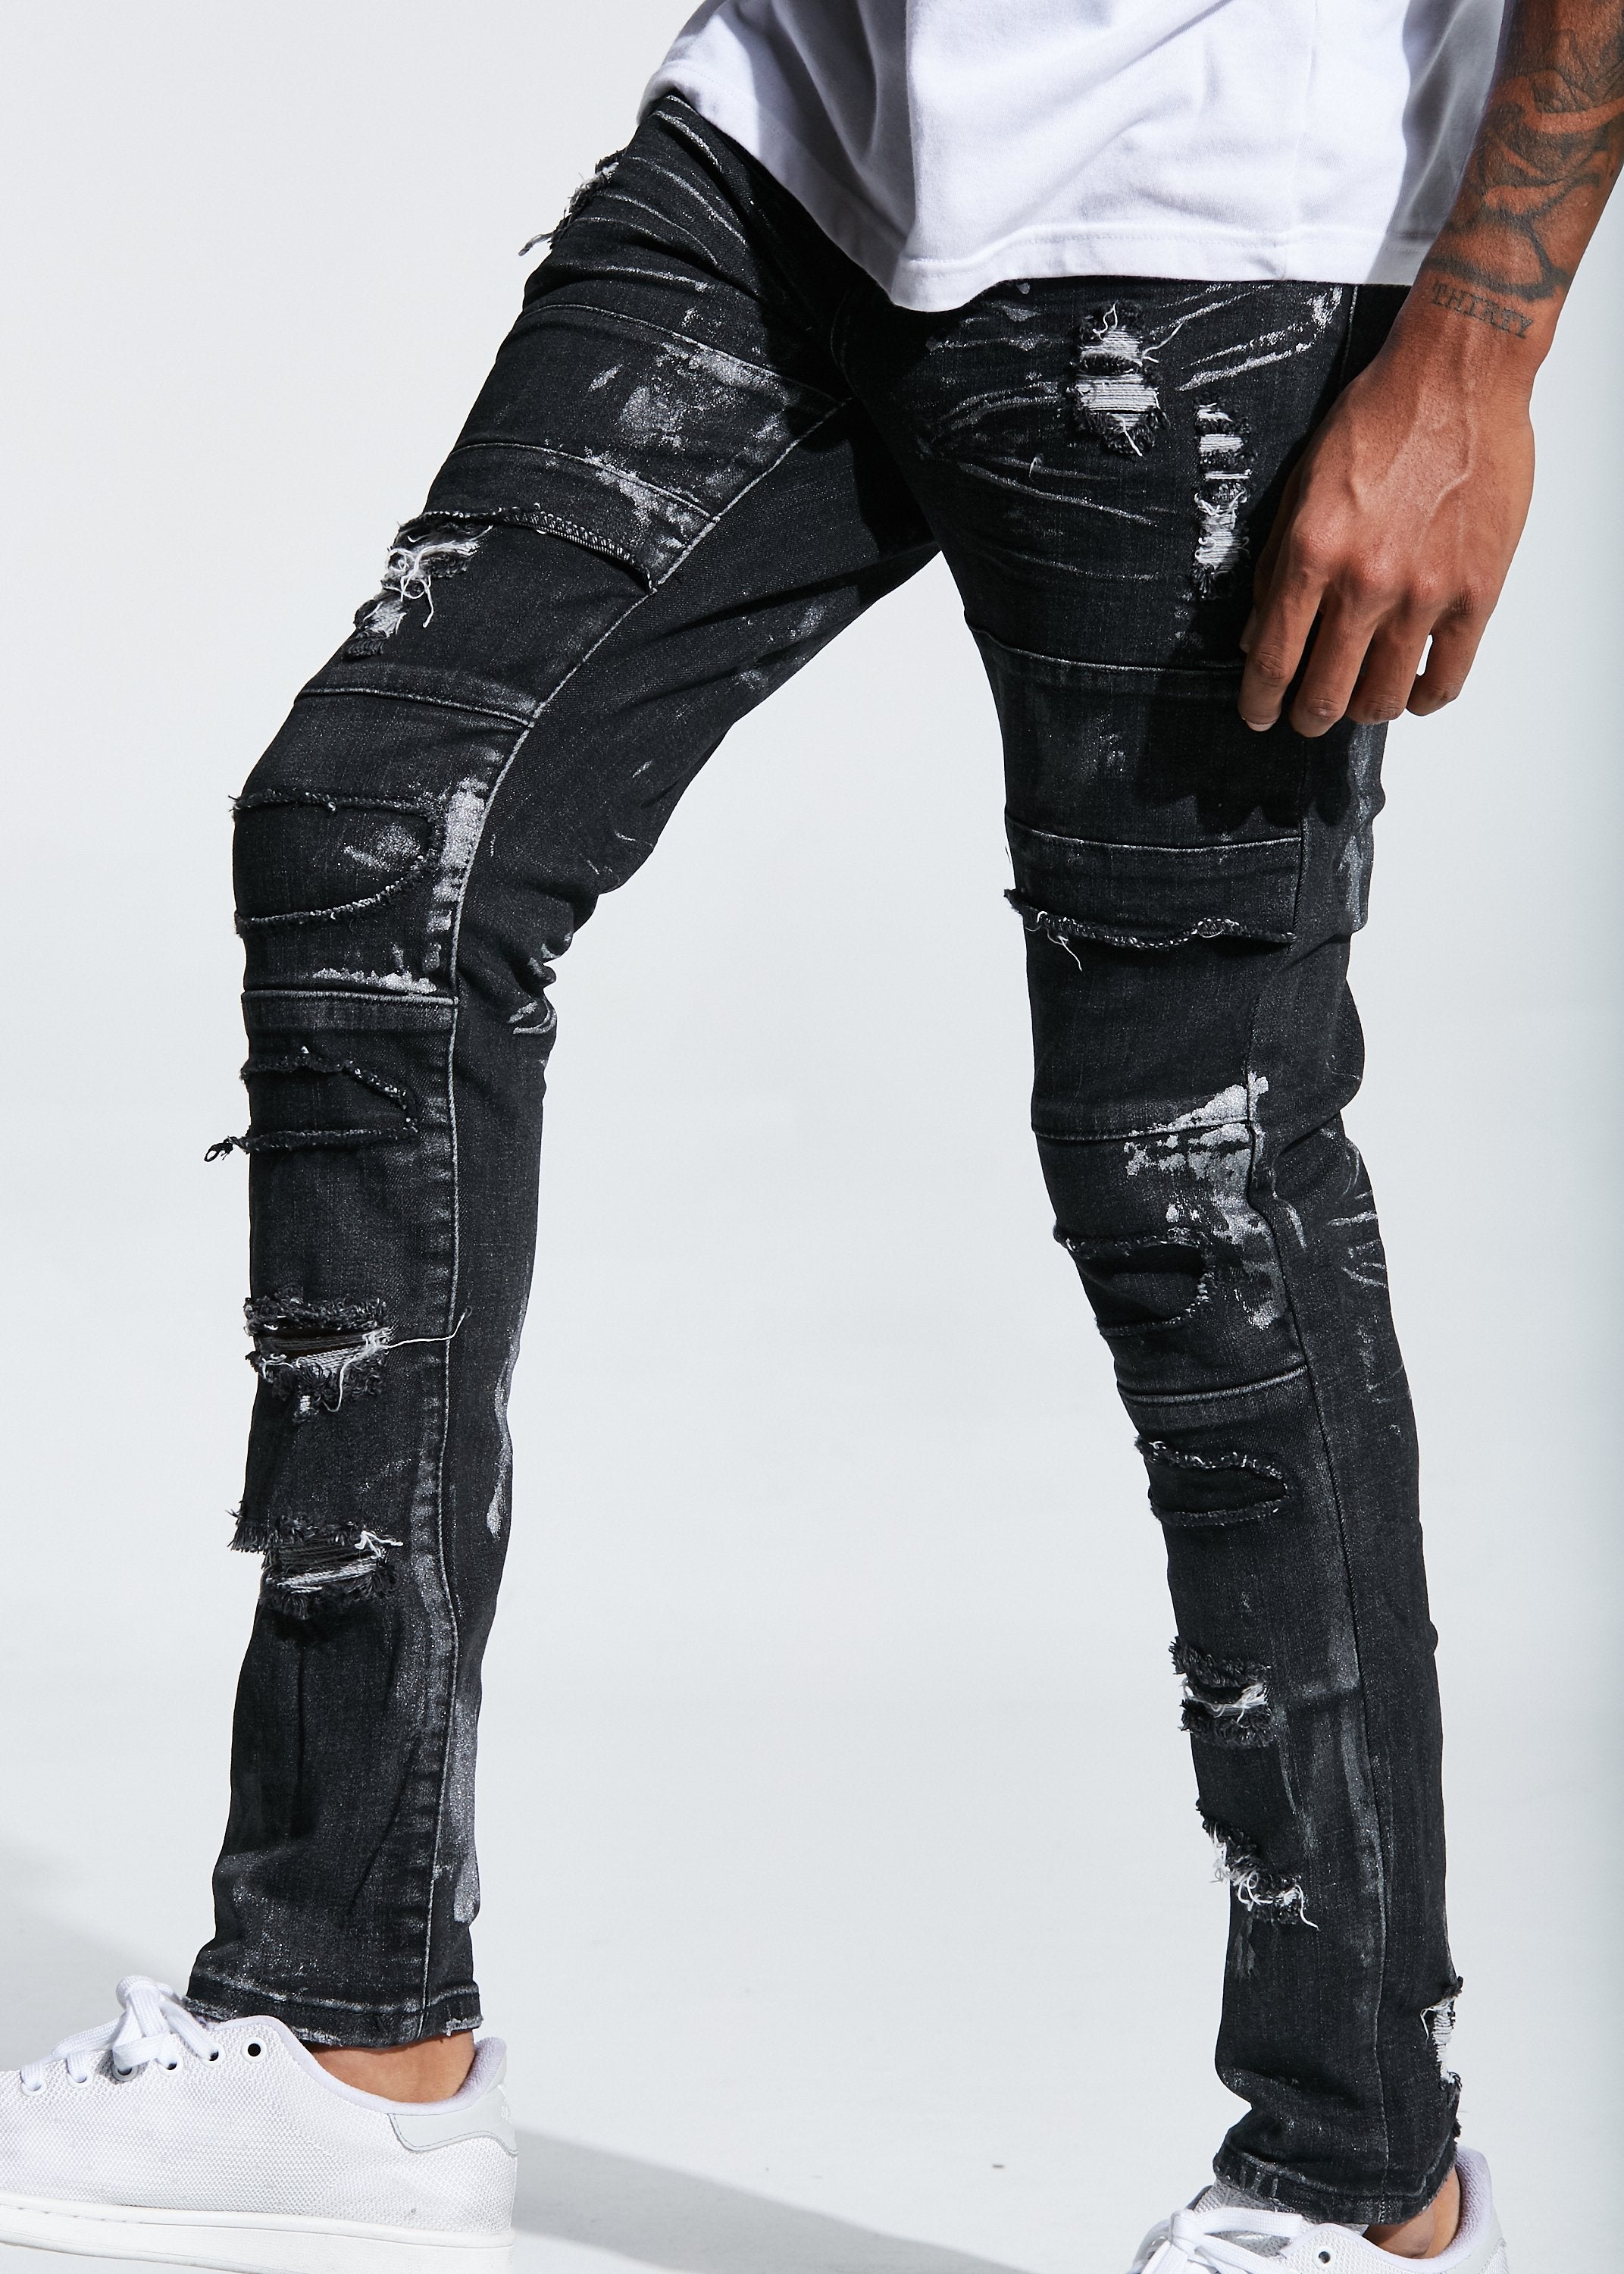 Details more than 215 black painted jeans